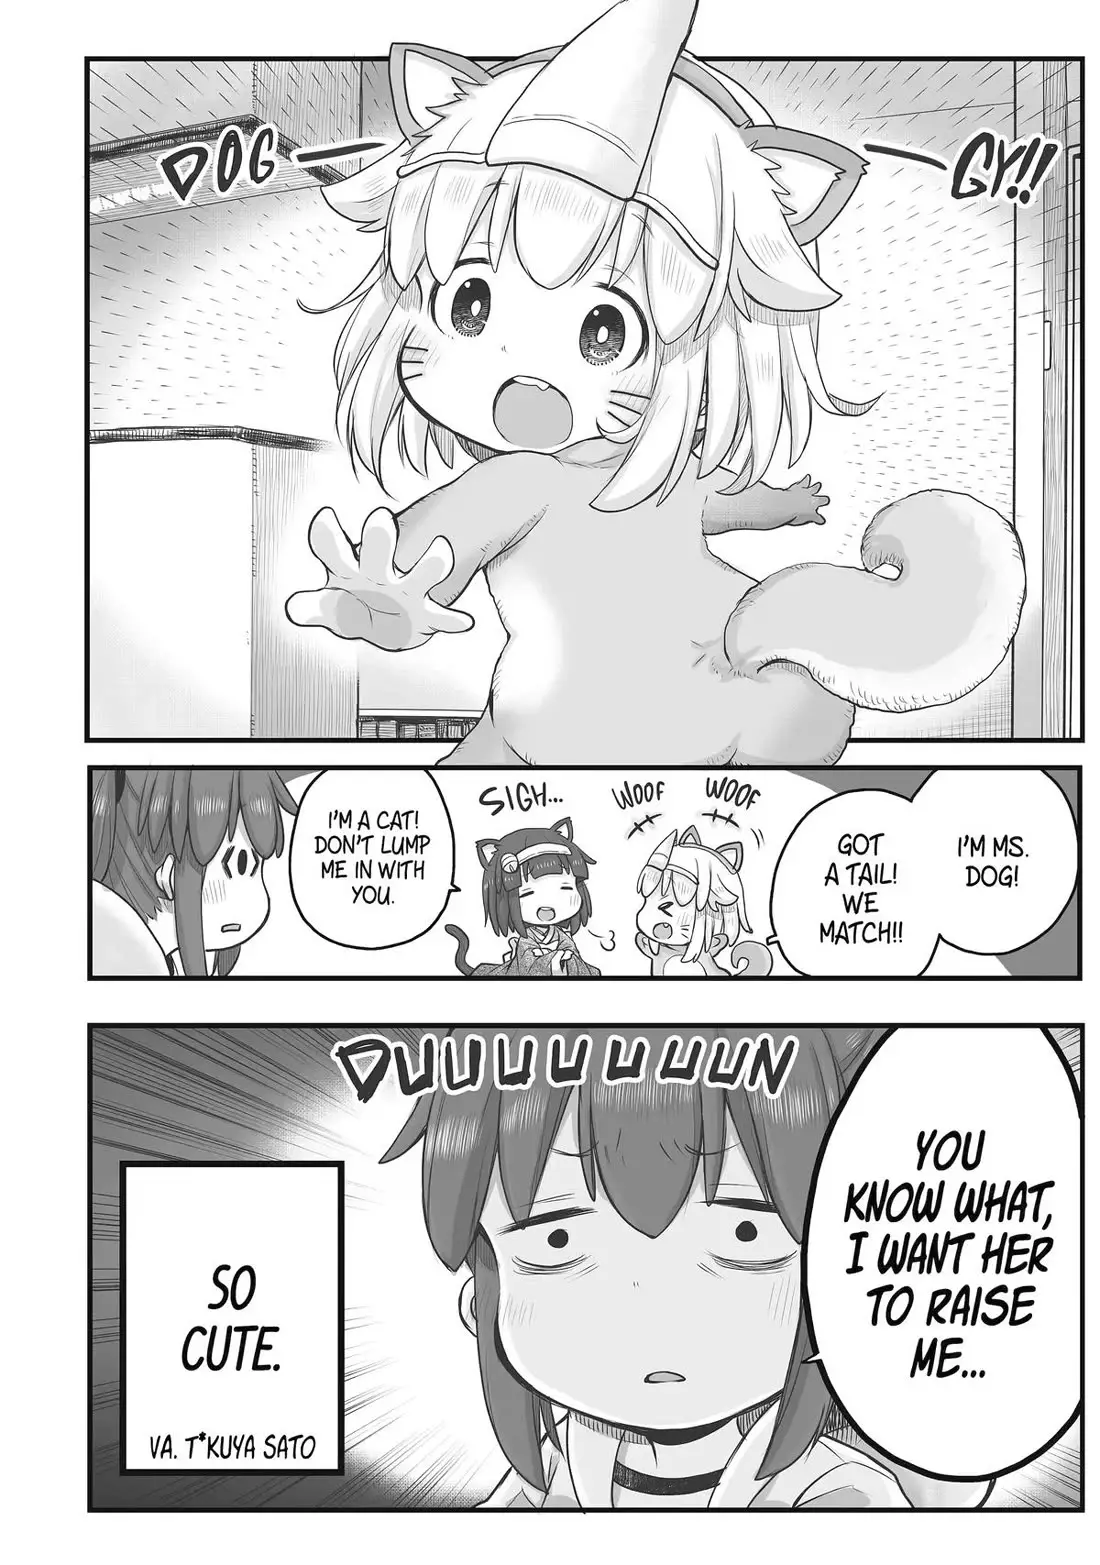 Ms. Corporate Slave Wants To Be Healed By A Loli Spirit - 71 page 2-aa0f0e8c